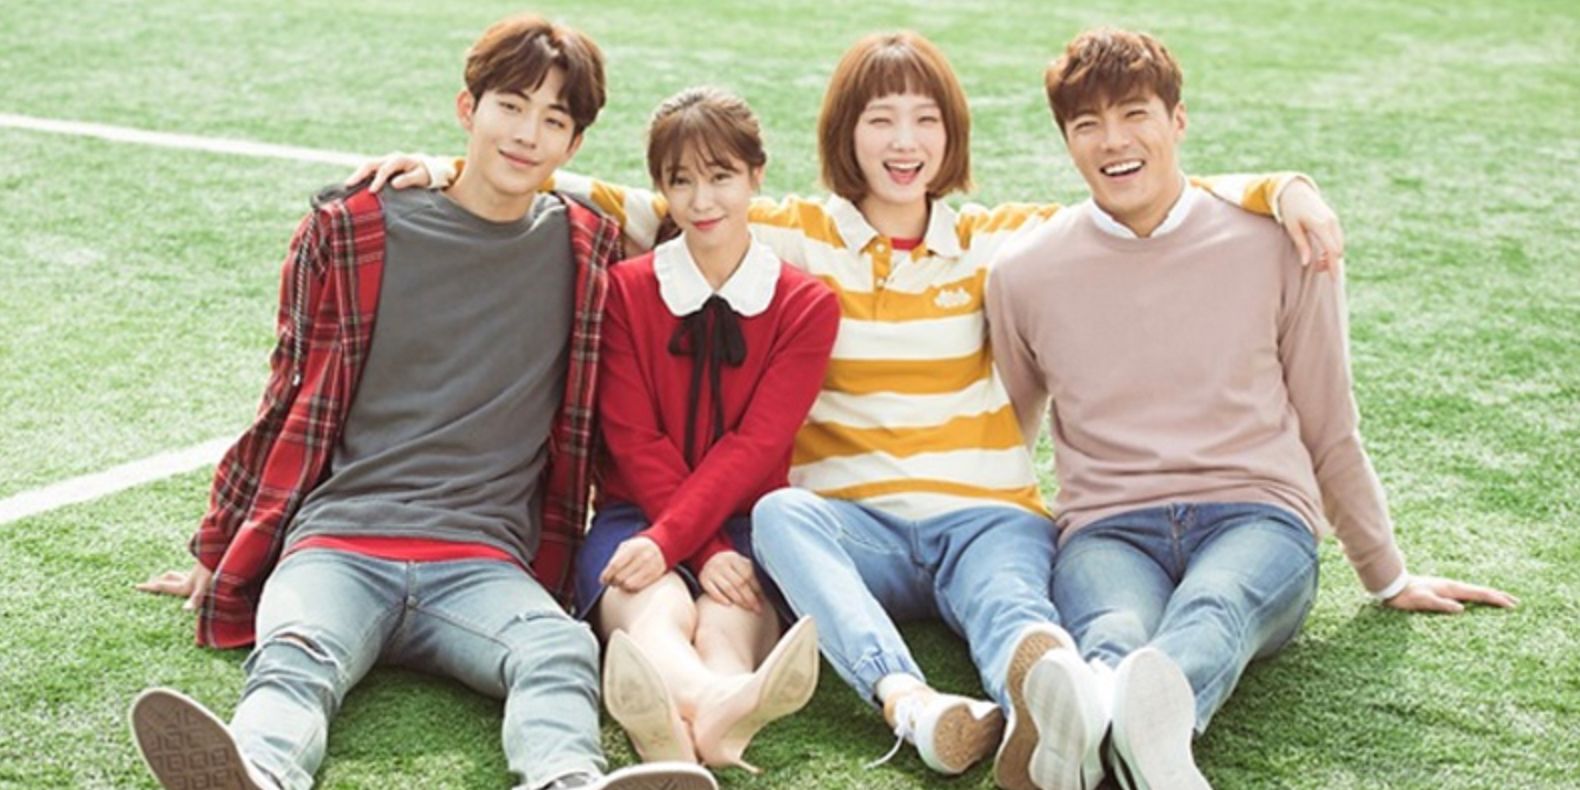 Four of the main cast of Weightlifting Fairy Kim Bok-joo sitting on the grass of a football field